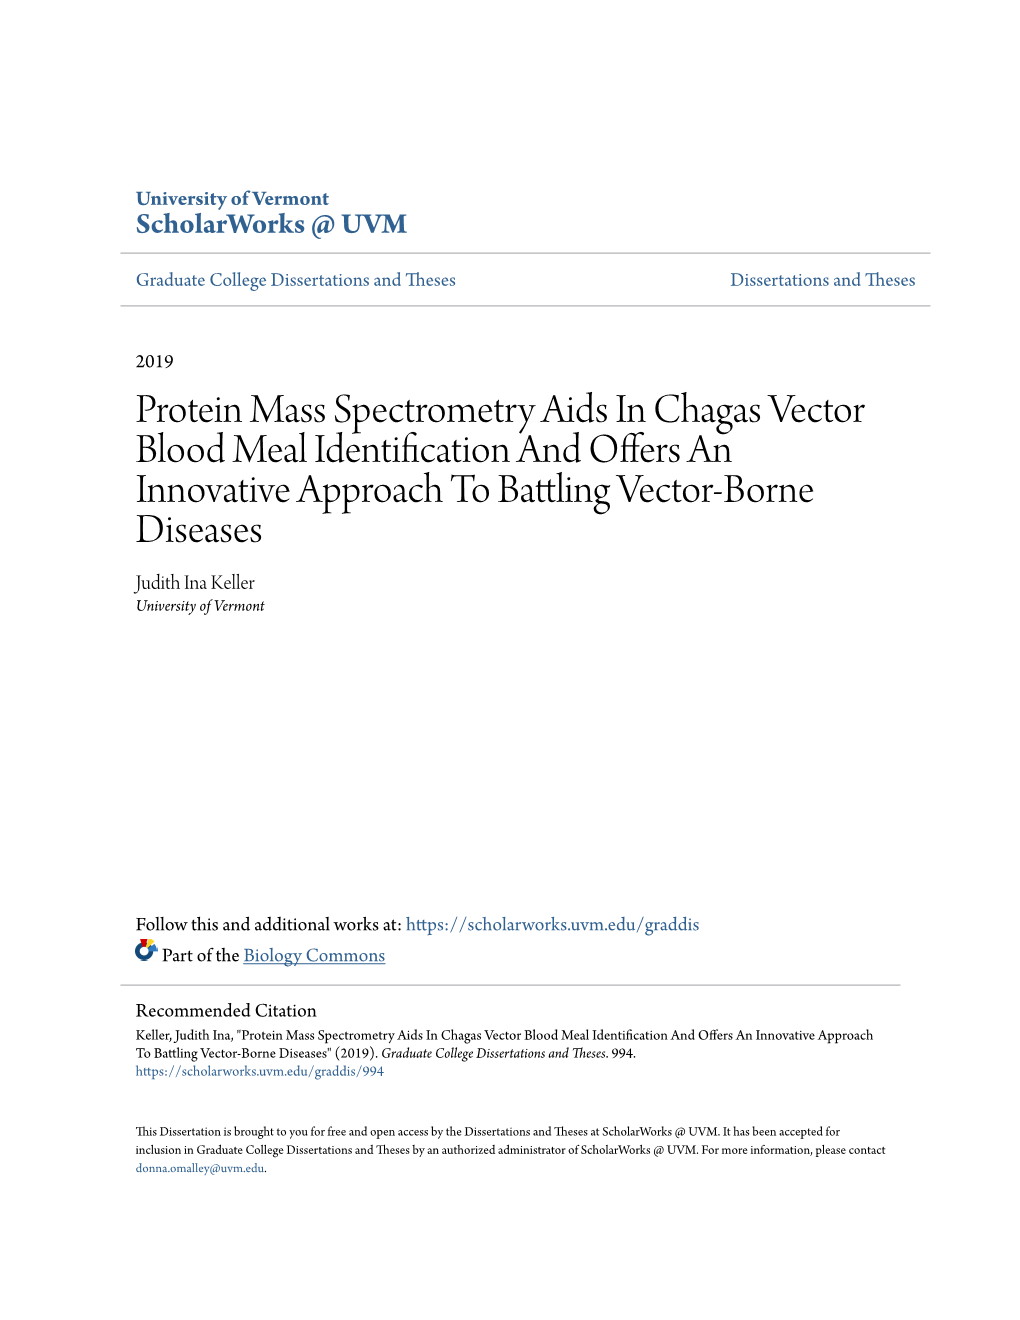 Protein Mass Spectrometry Aids in Chagas Vector Blood Meal Identification and Offers an Innovative Approach to Battling Vector-B